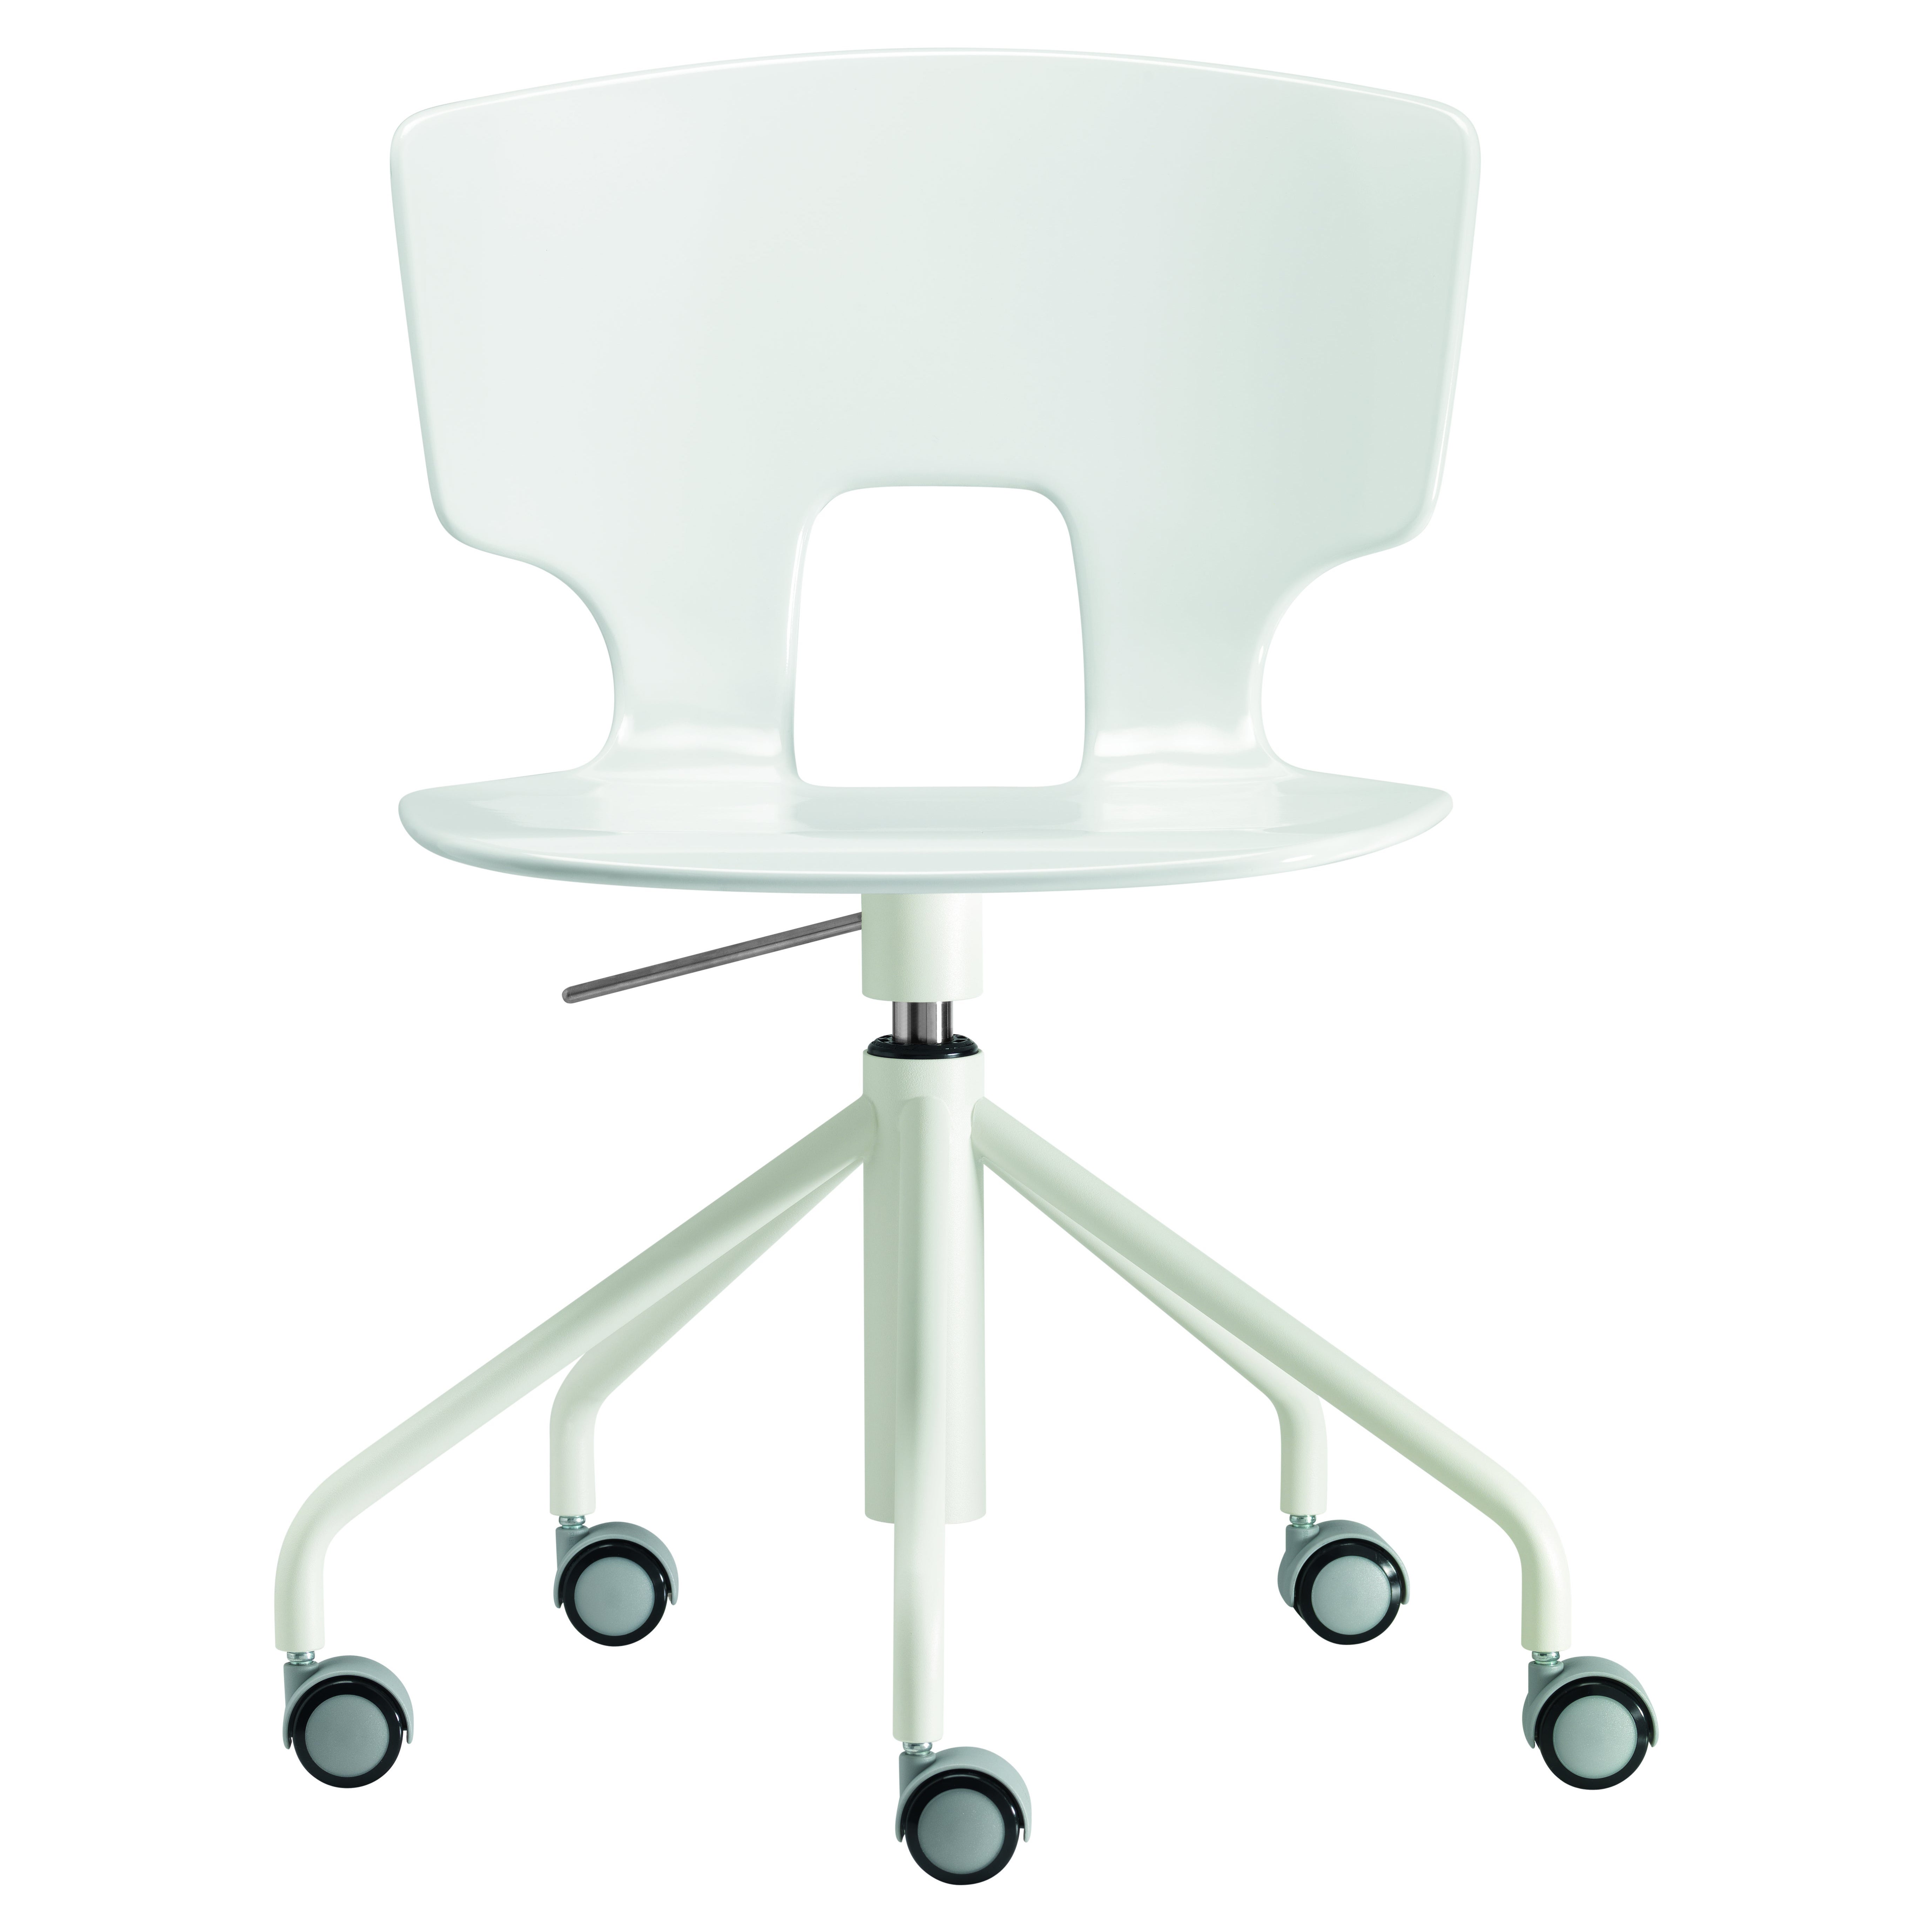 Alias 50C Erice Studio Chair in White Lacquered Steel Frame by Alfredo Häberli For Sale